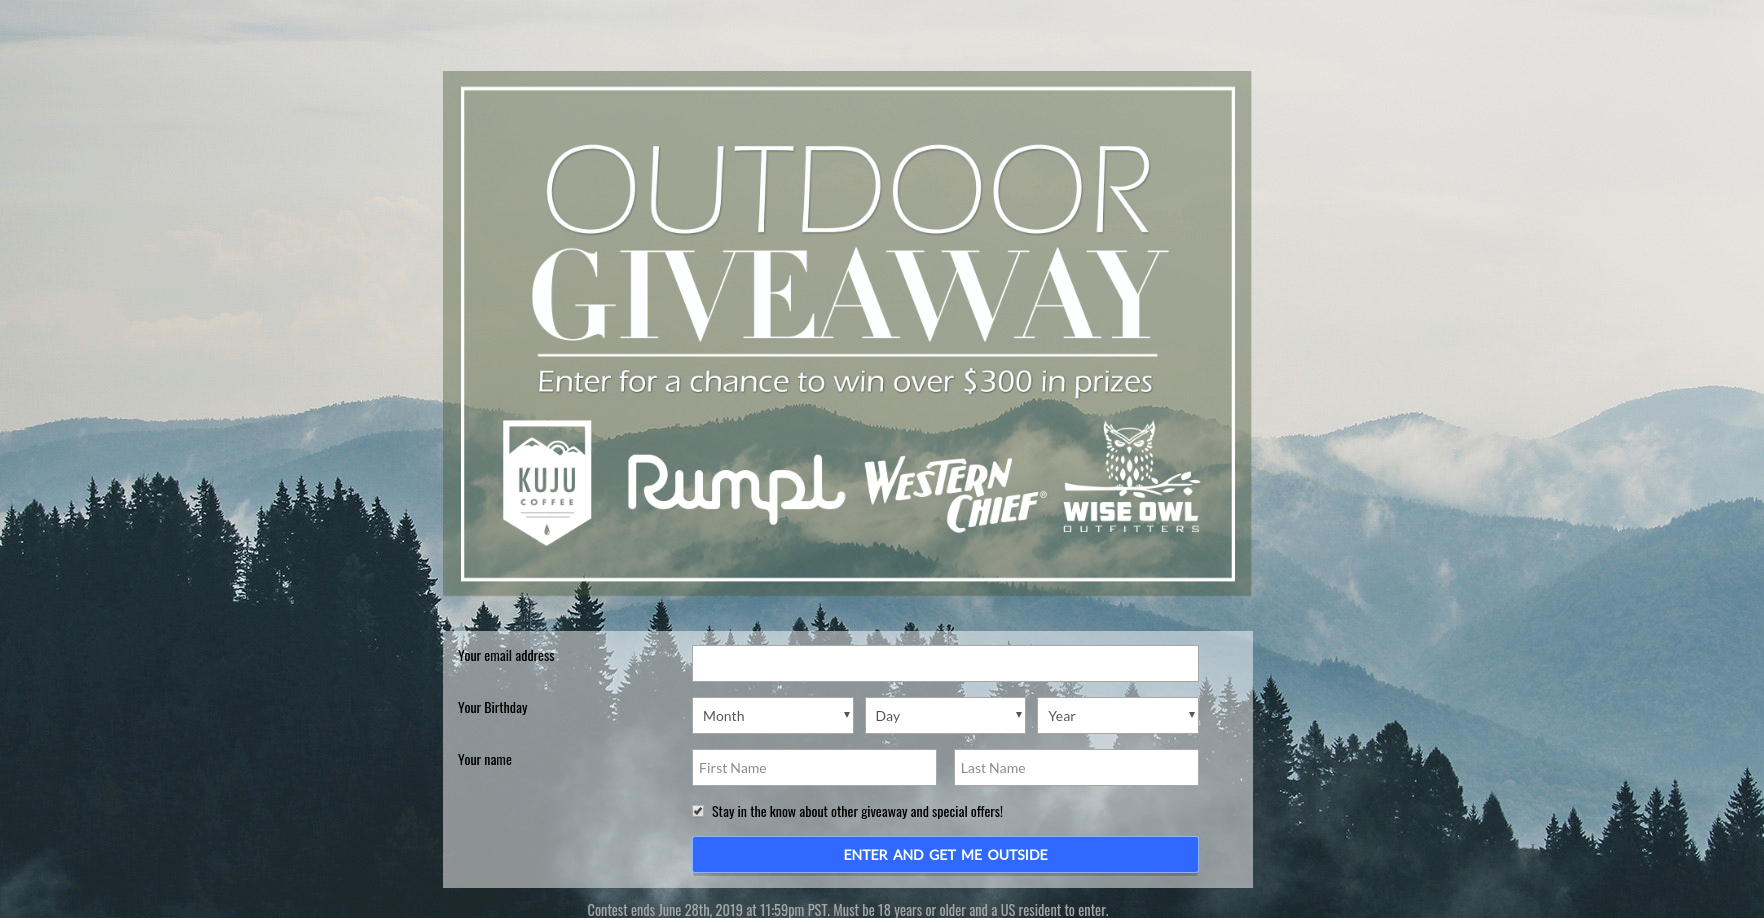 woobox giveaway landing page example custom form branded text